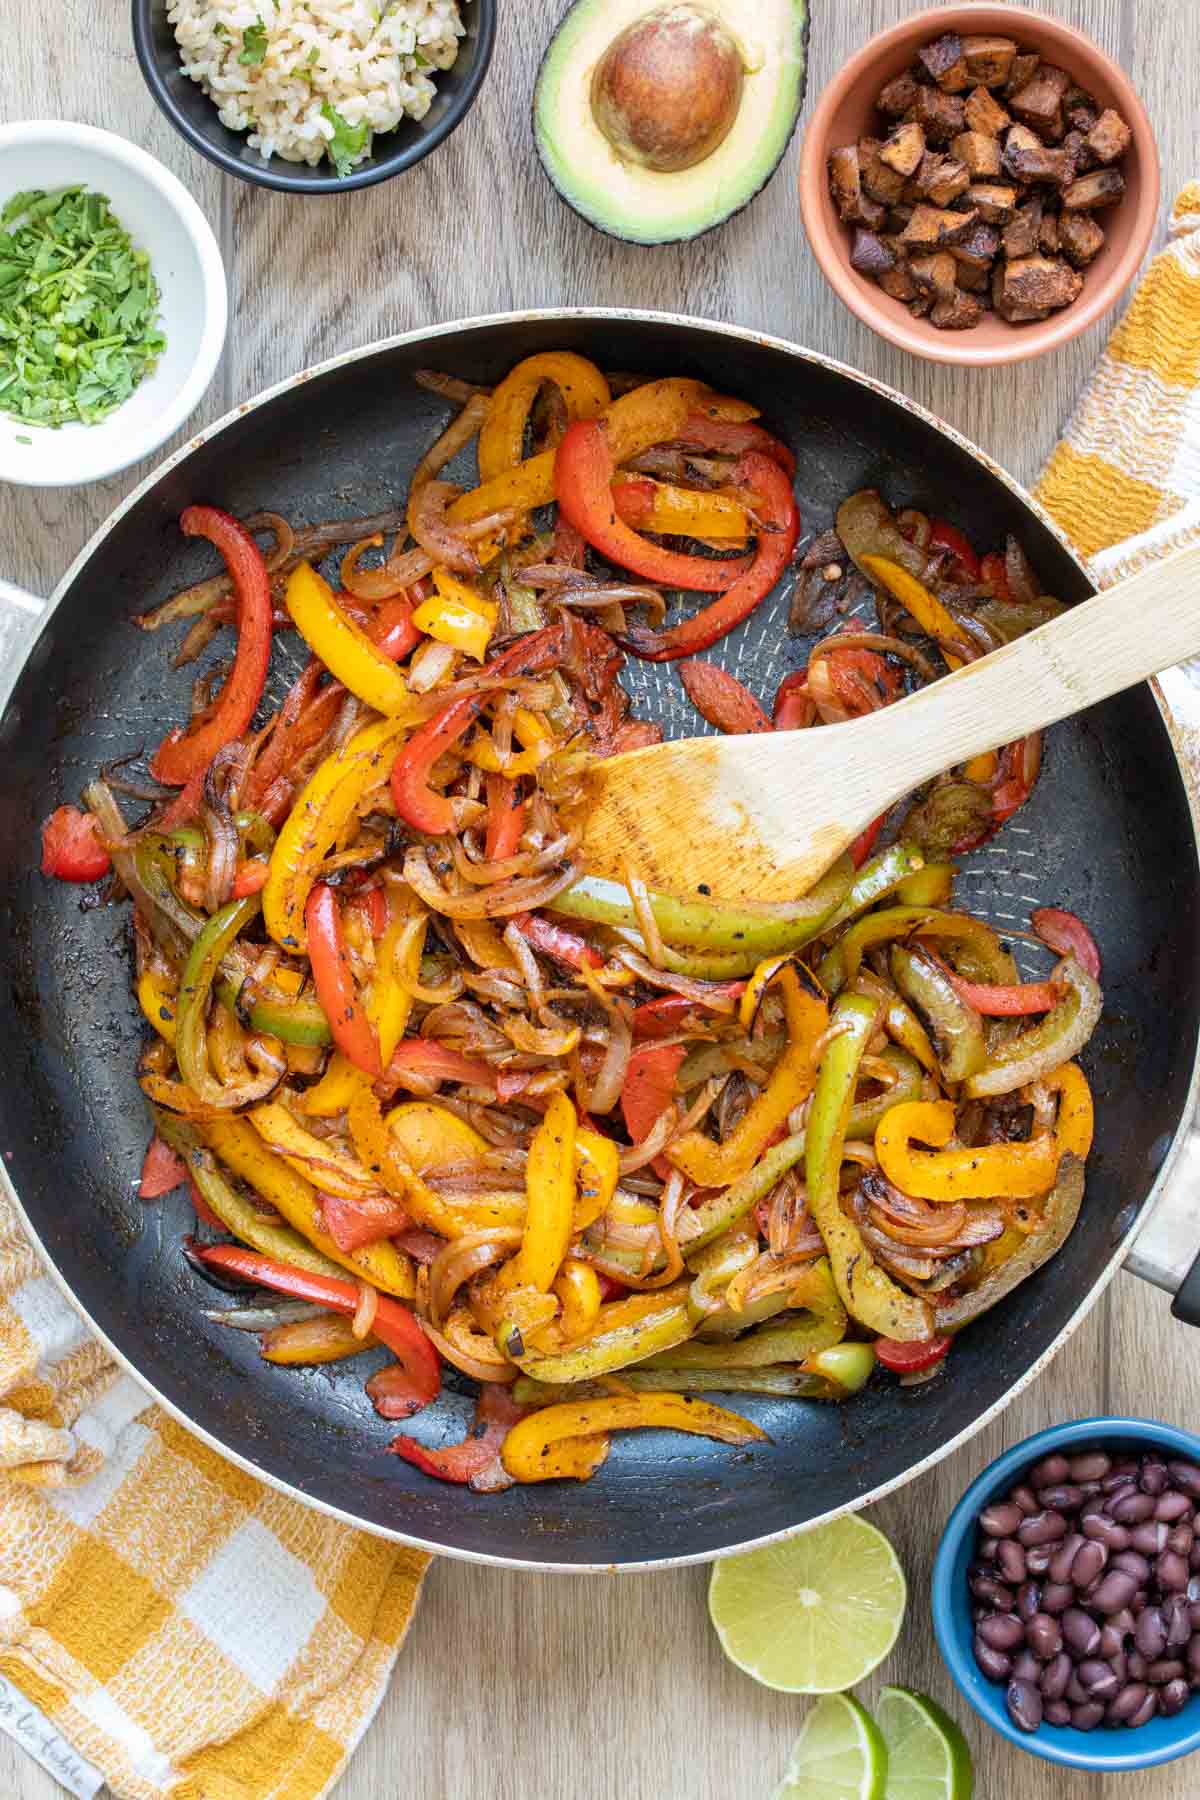 Wooden spoon mixing cooking peppers and onions in a pan